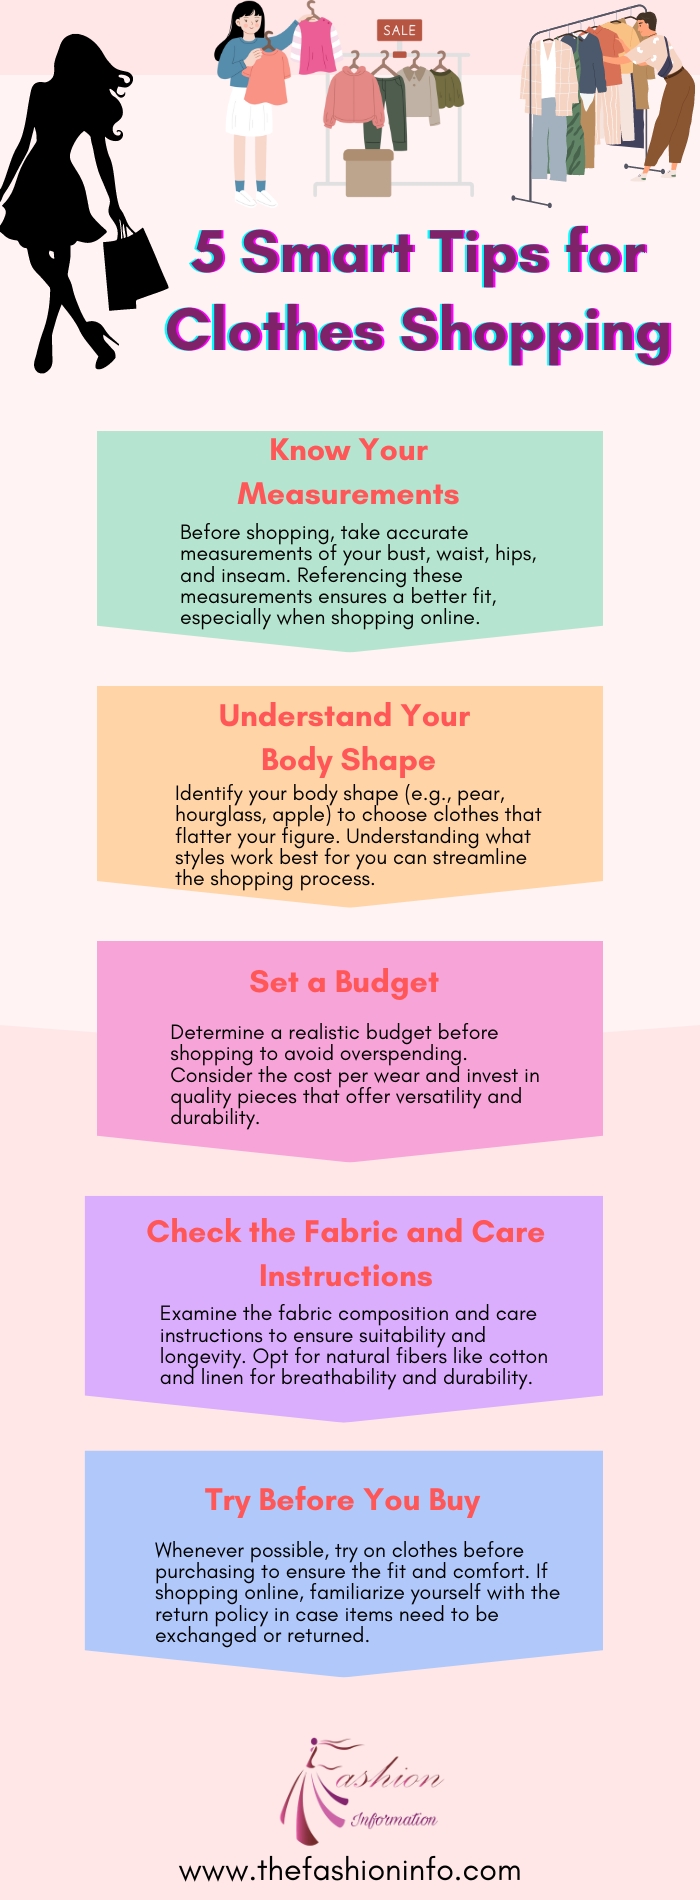 5 Smart Tips for Clothes Shopping